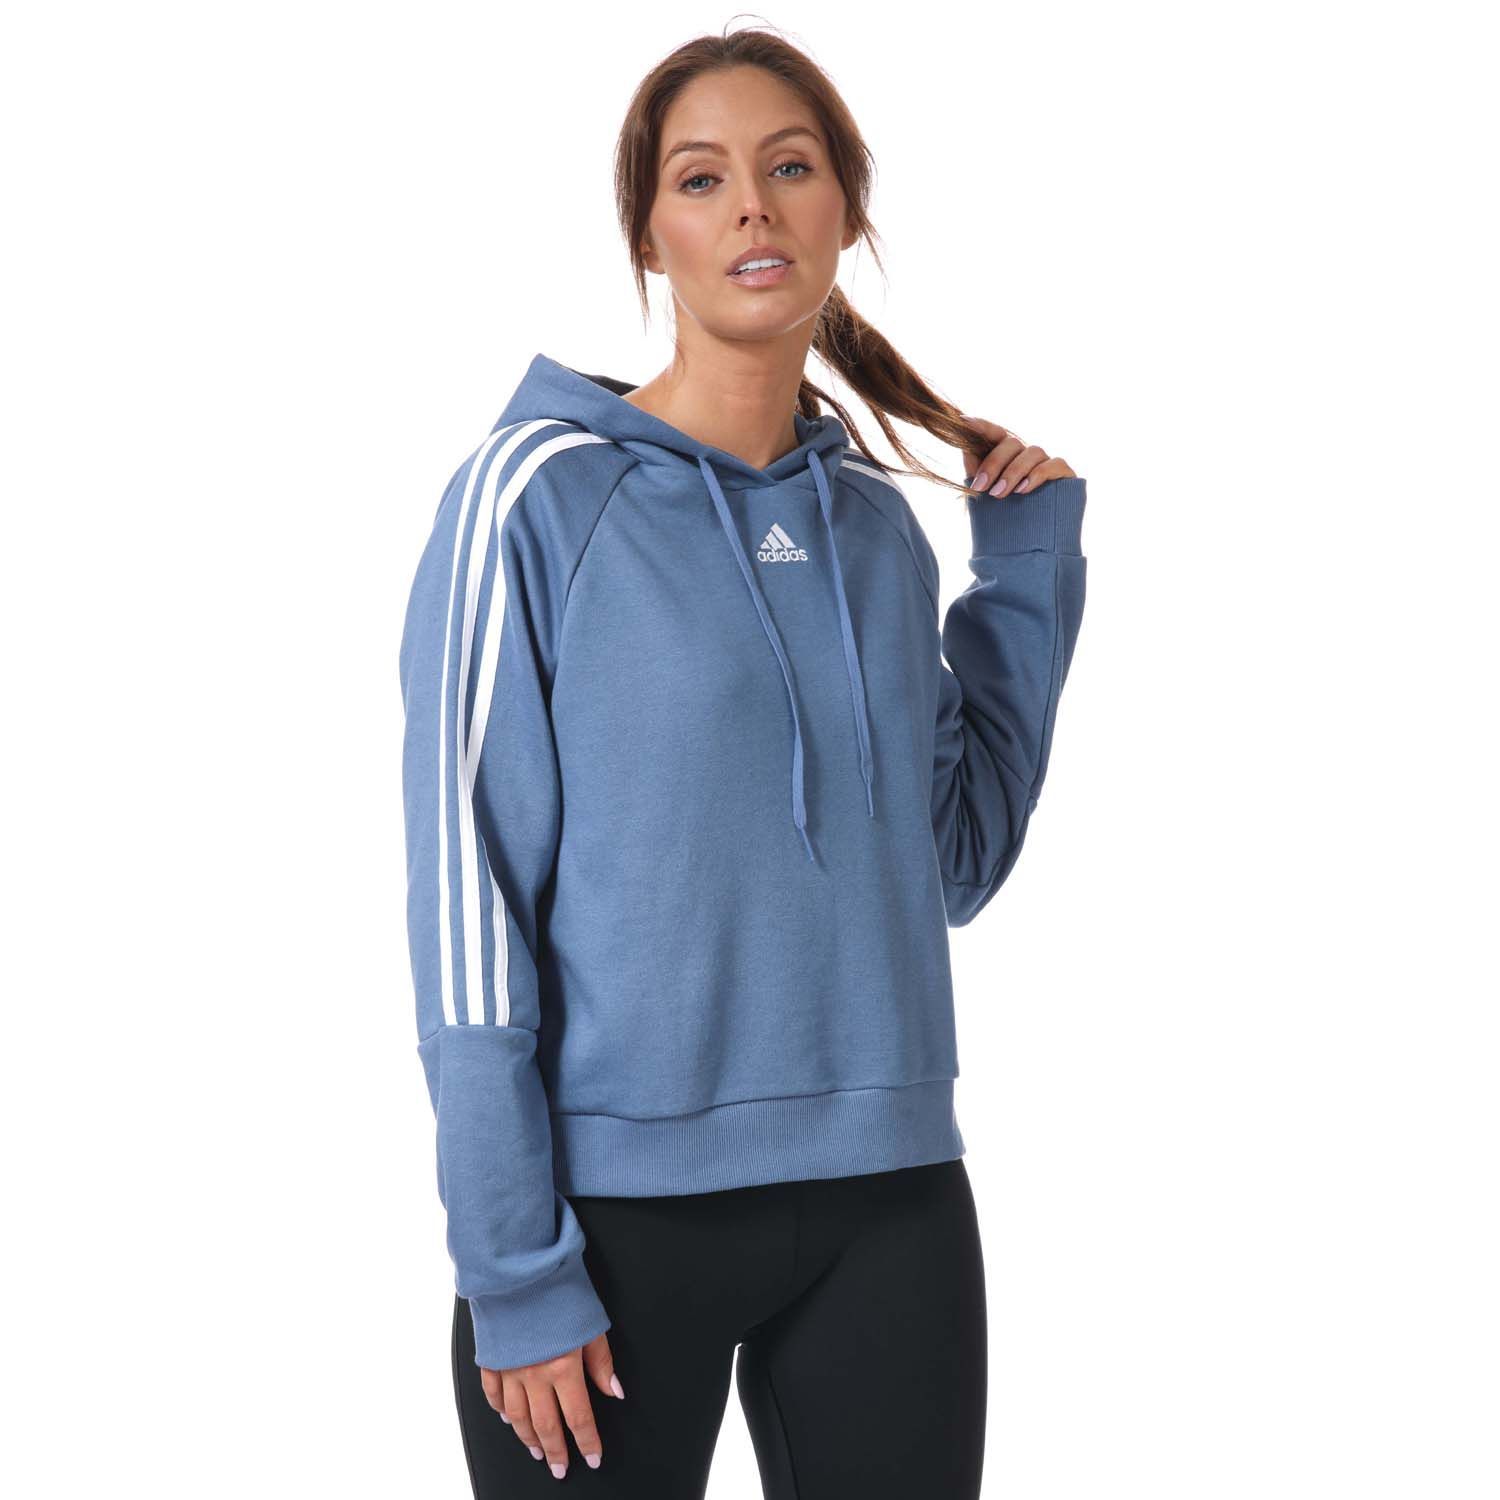 Womens adidas Essentials 3- Stripes Cropped Hoody in blue.- Drawcord-adjustable hood.- Long sleeves.- Ribbed cuffs and hem.- 3-Stripes down both arms.- adidas Badge of Sport logo on the chest.- Loose fit.- Main Material: 53% Cotton  36% Polyester (Recycled)  11% Rayon. Hood Lining: 100% Cotton. - Ref:GL1461